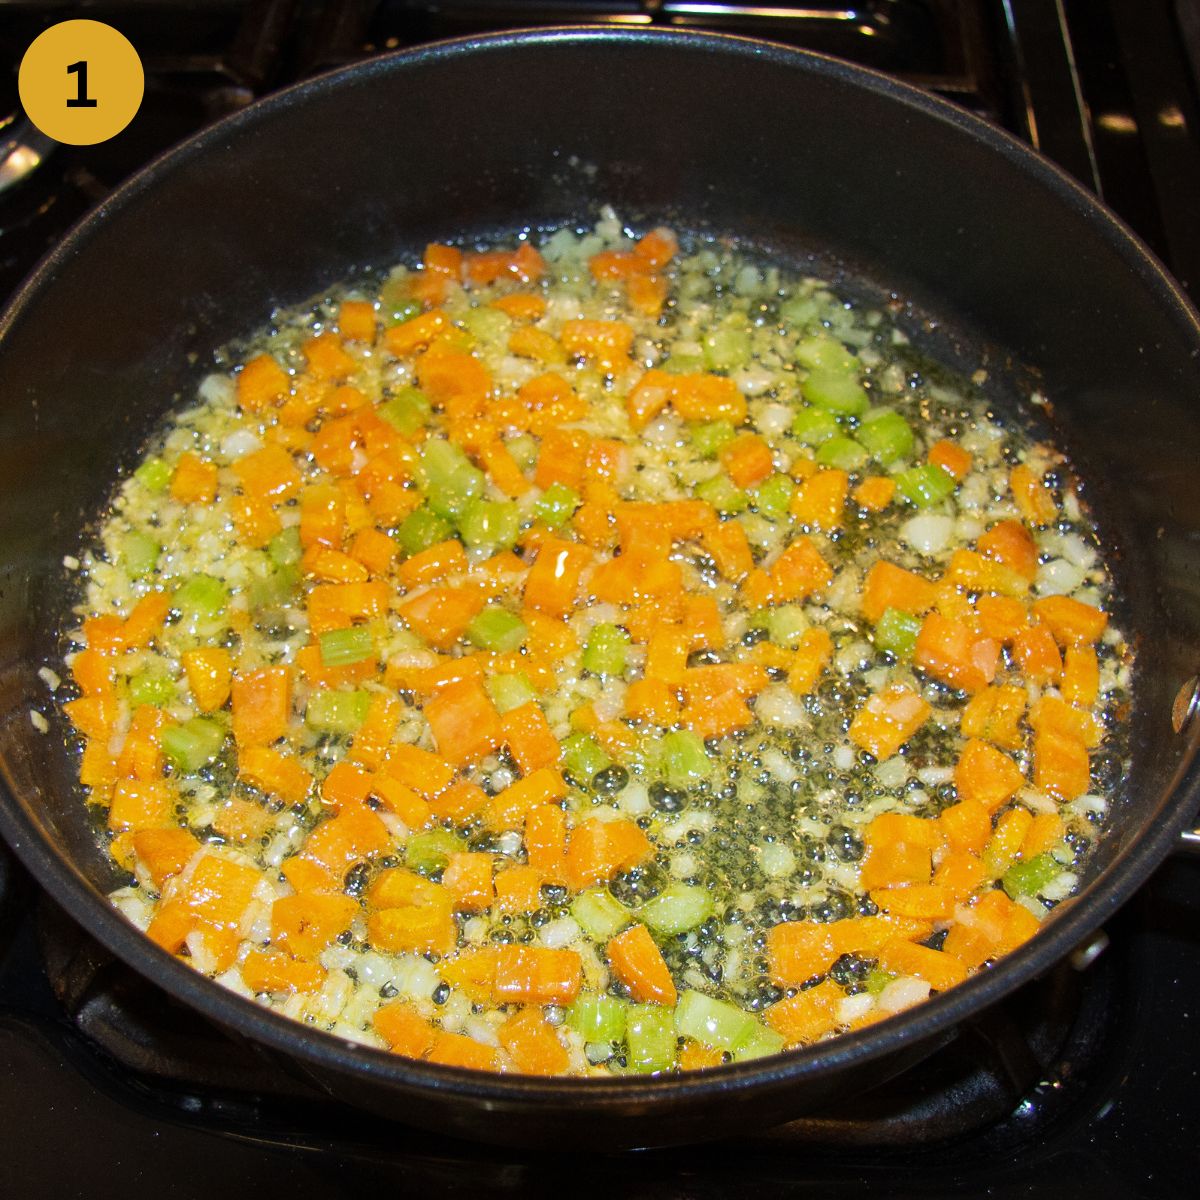 saute carrots, celery and onion in a saucepan.